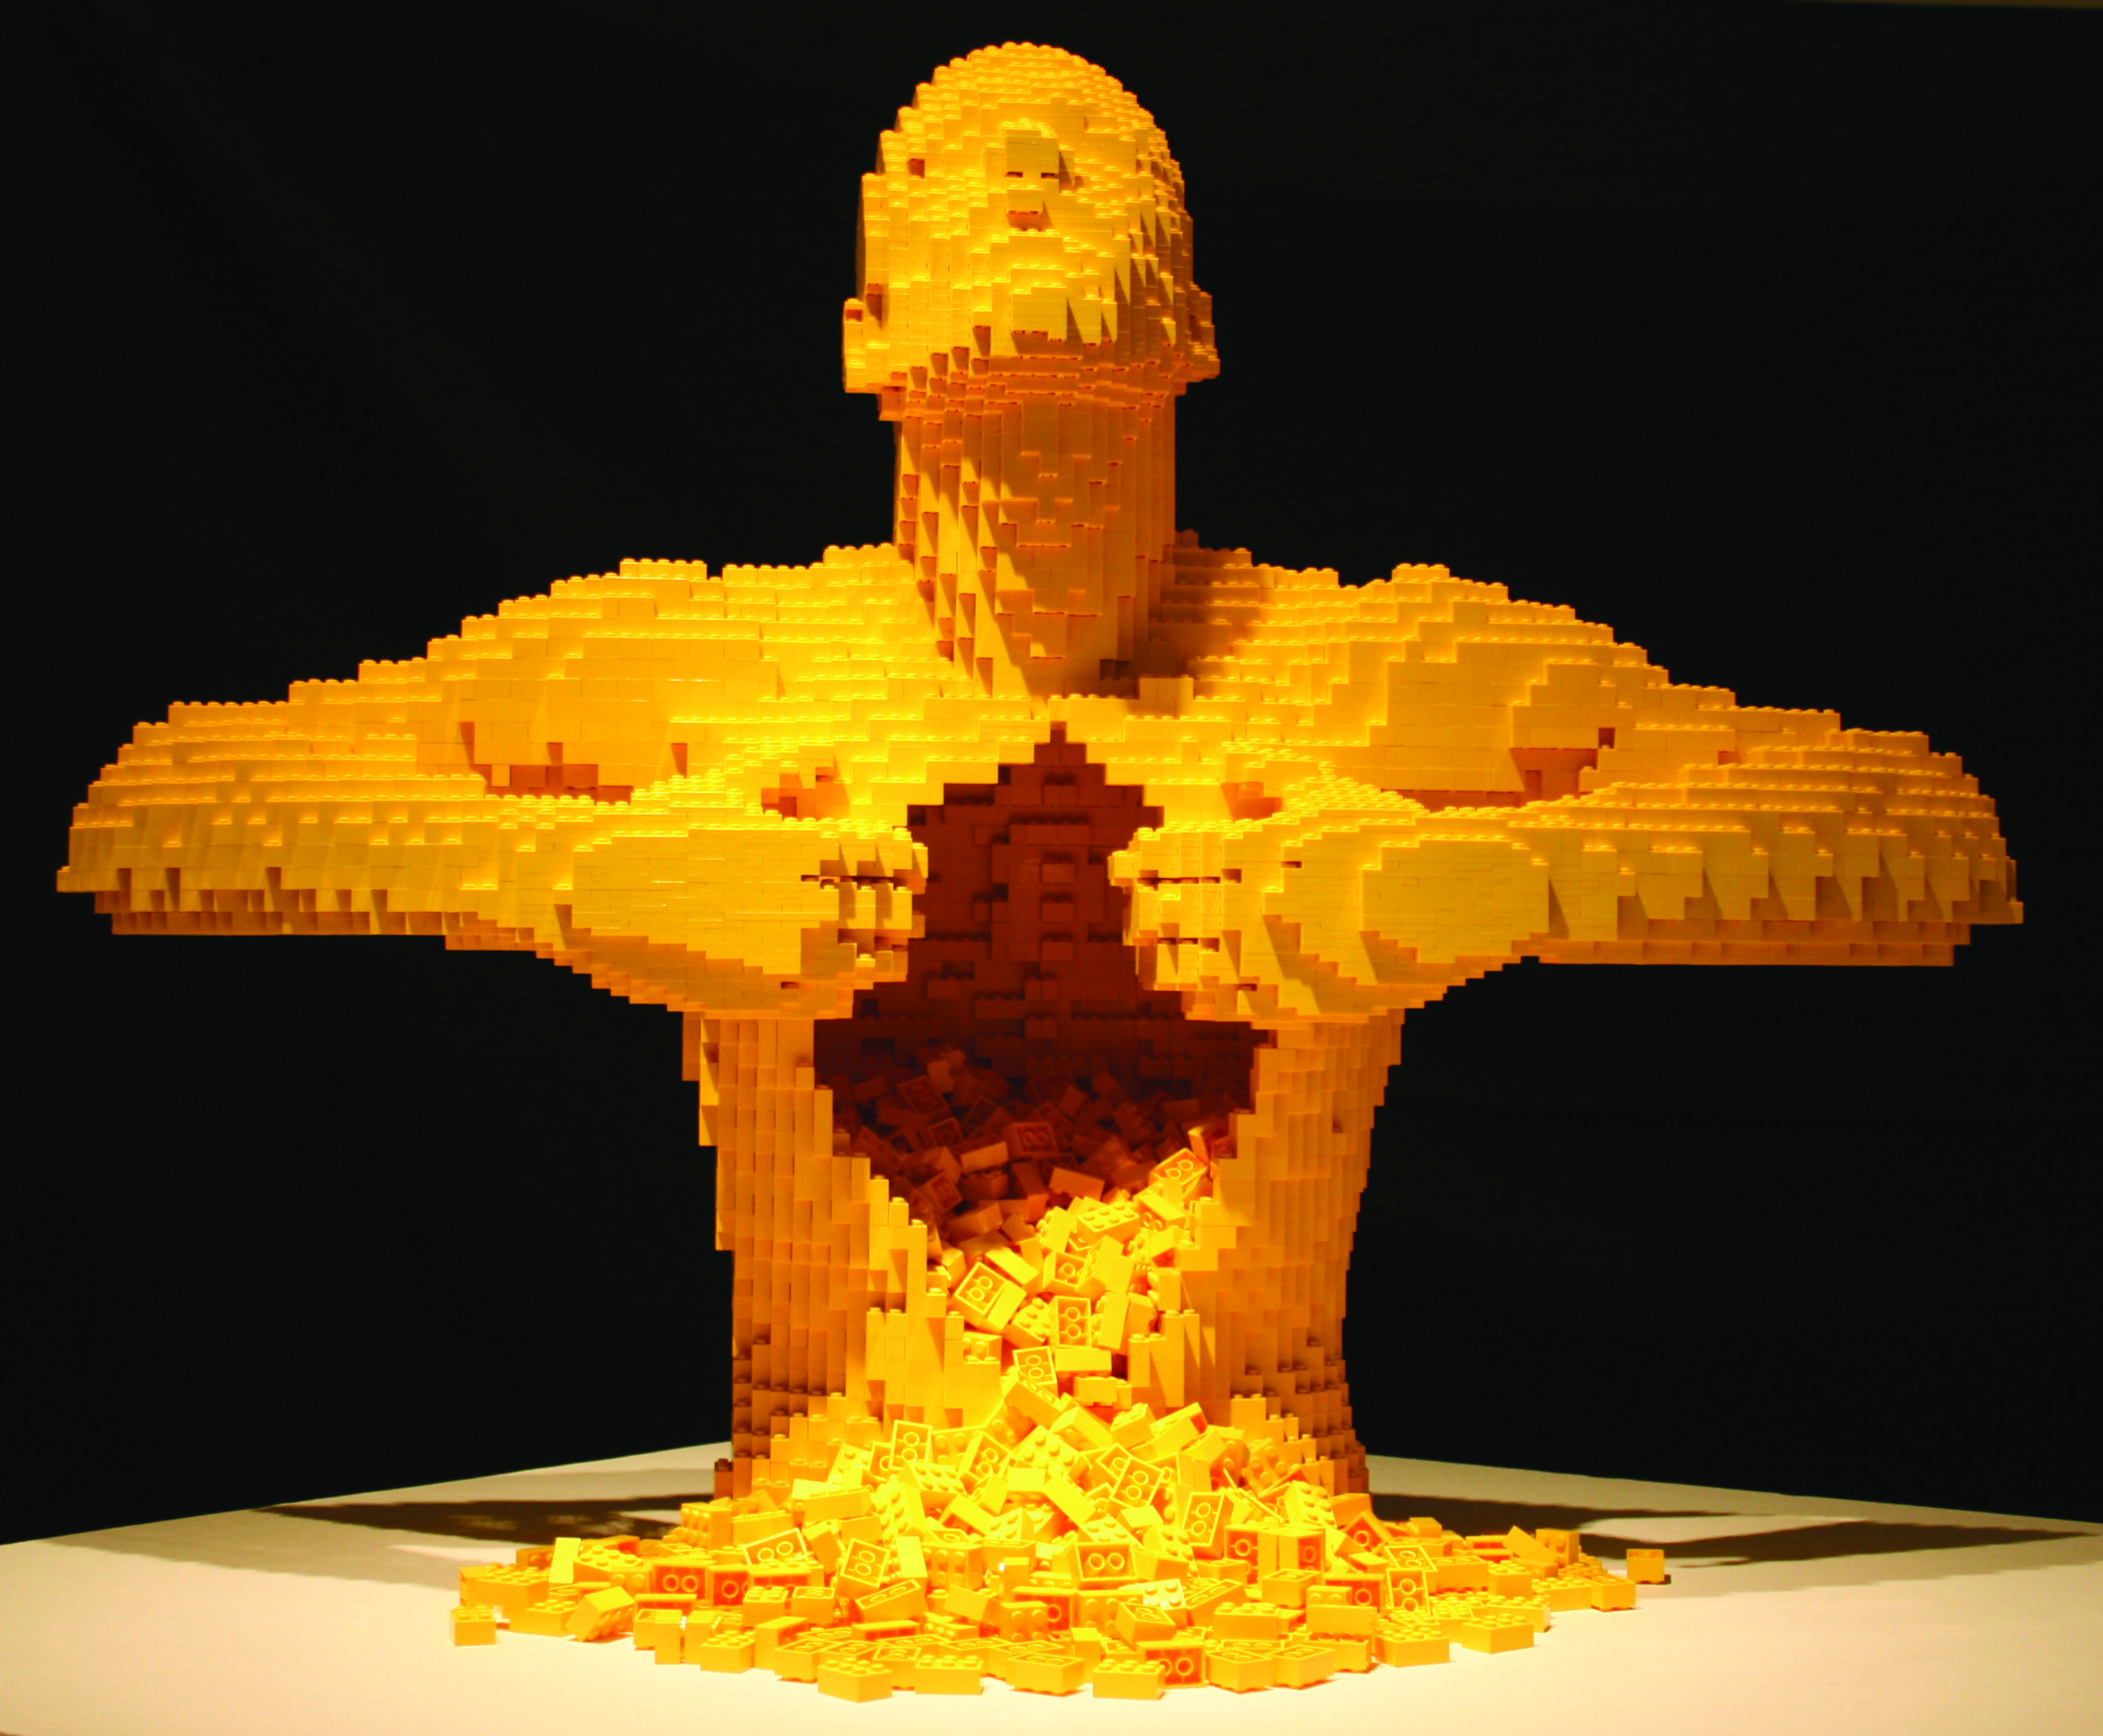 BRICK BY BRICK, GLOBAL LEGO® ART EXHIBITION COMES TO MANCHESTER THE ART OF THE BRICK, BY NATHAN SAWAYA